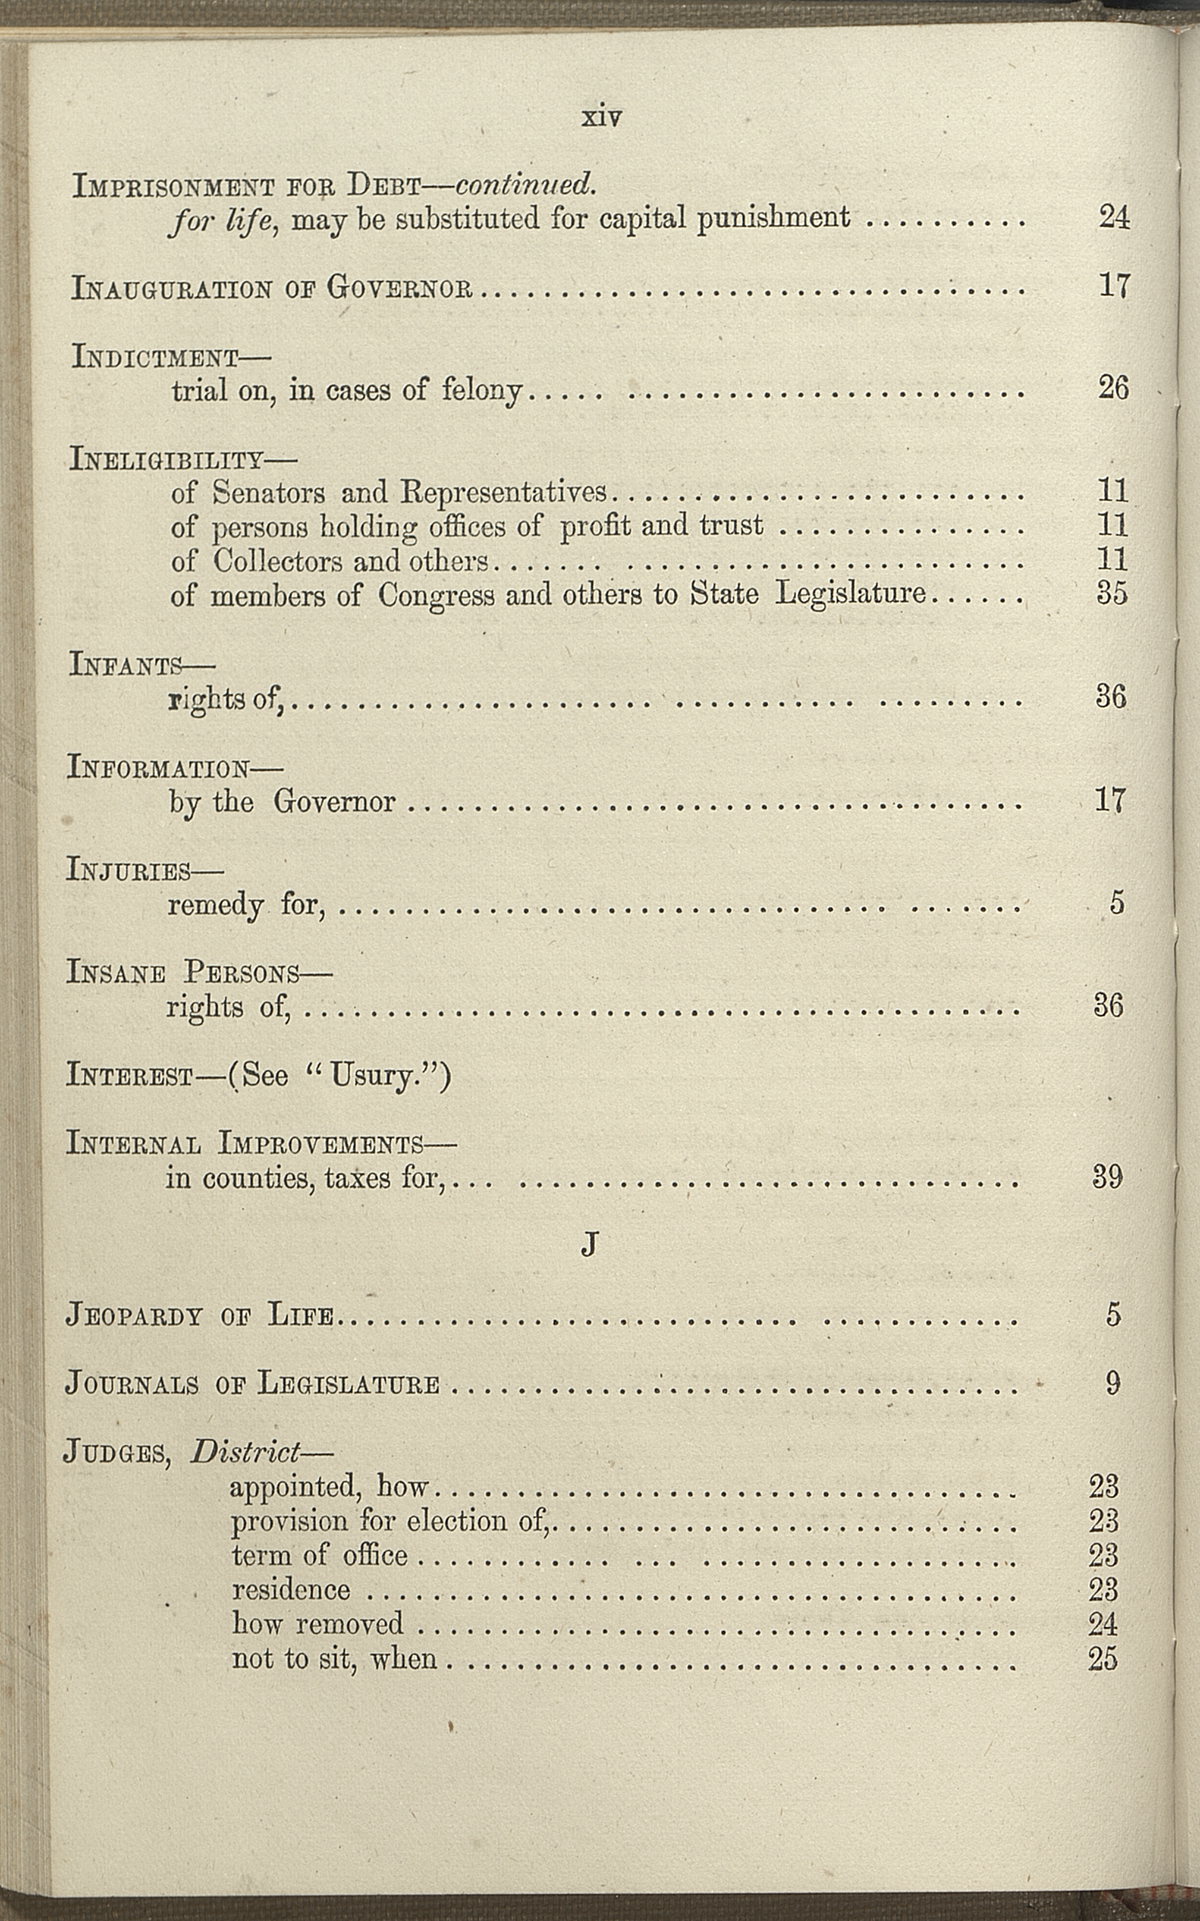 page 14 - 1869 index